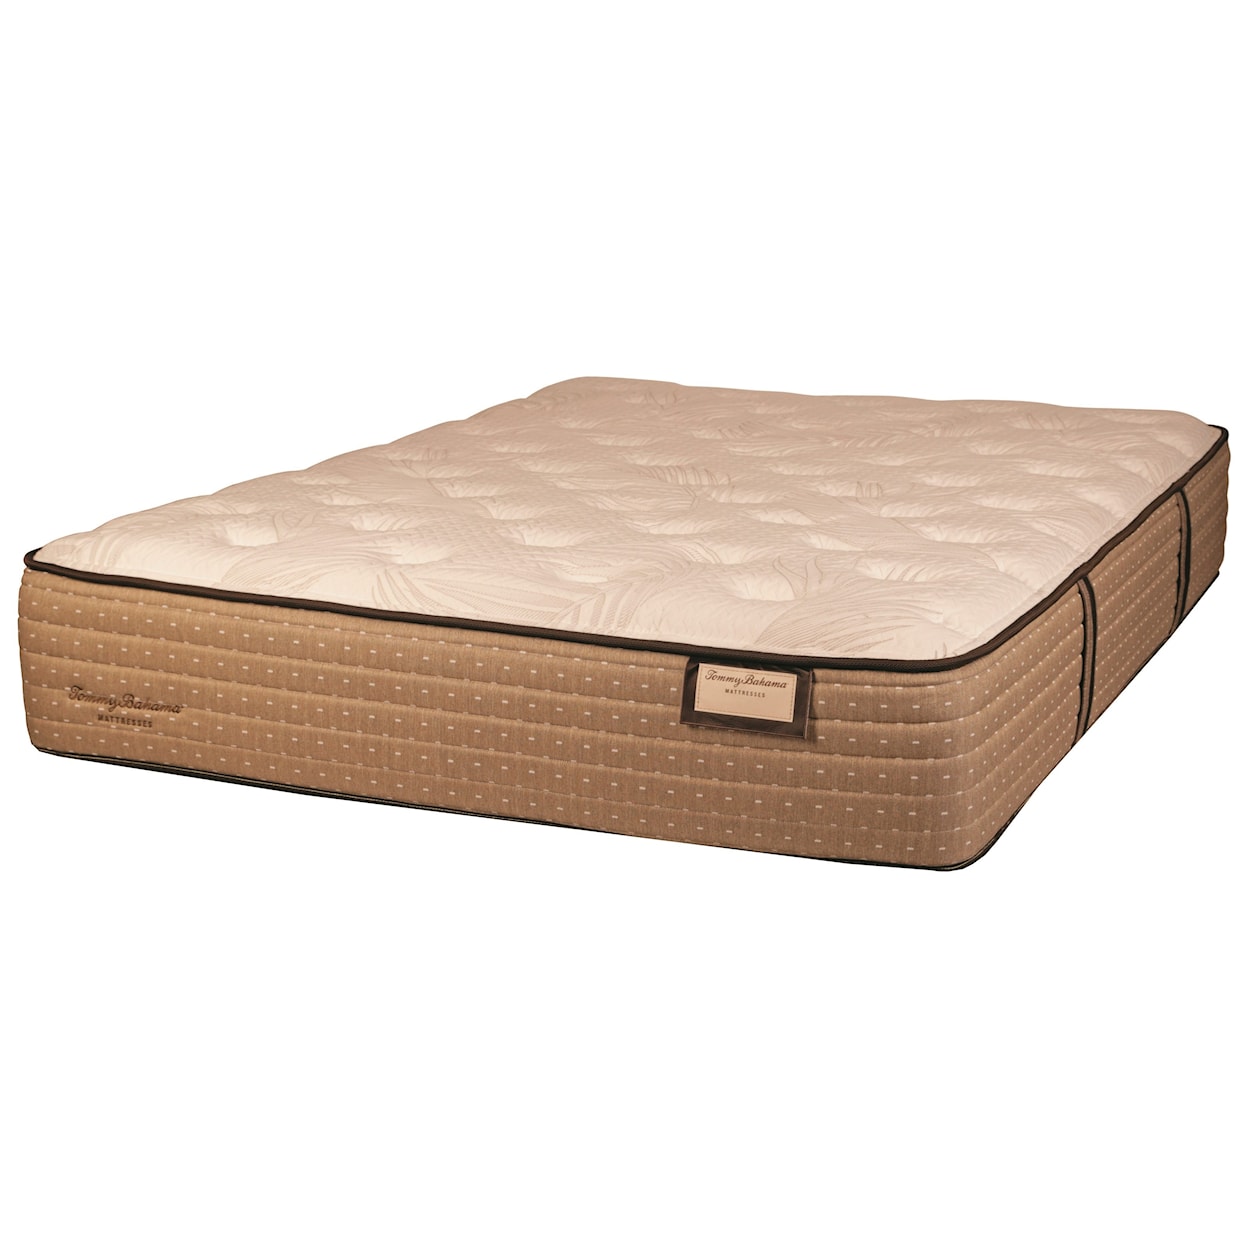 Therapedic Tommy Bahama Shake the Sand Firm 6034 Twin XL Firm Luxury Mattress